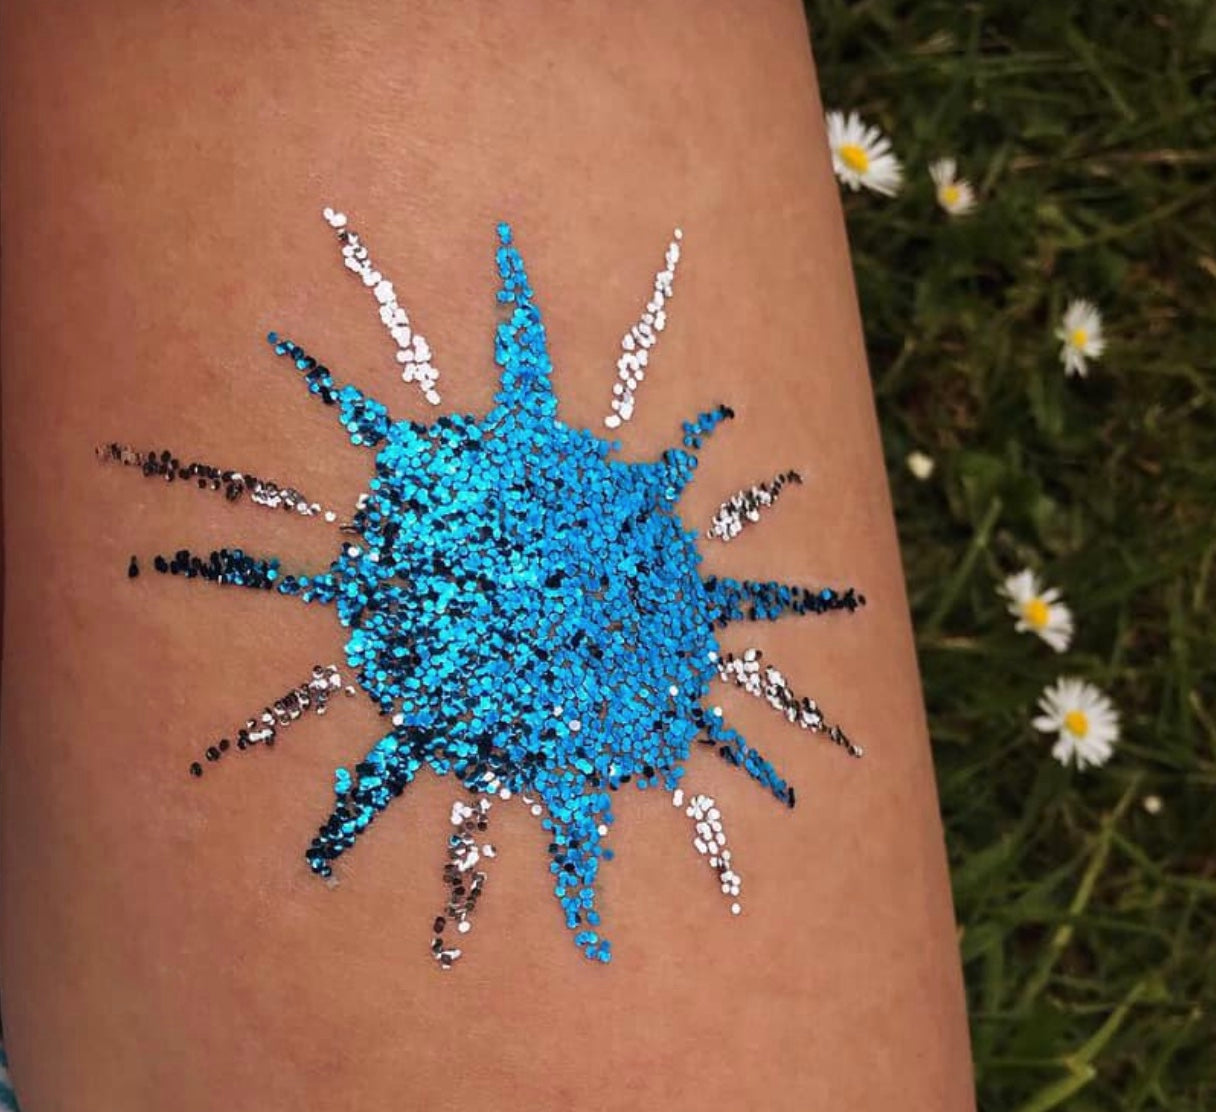 Sunshine made with blue and silver biodegradable glitter by Luminosity Glitter